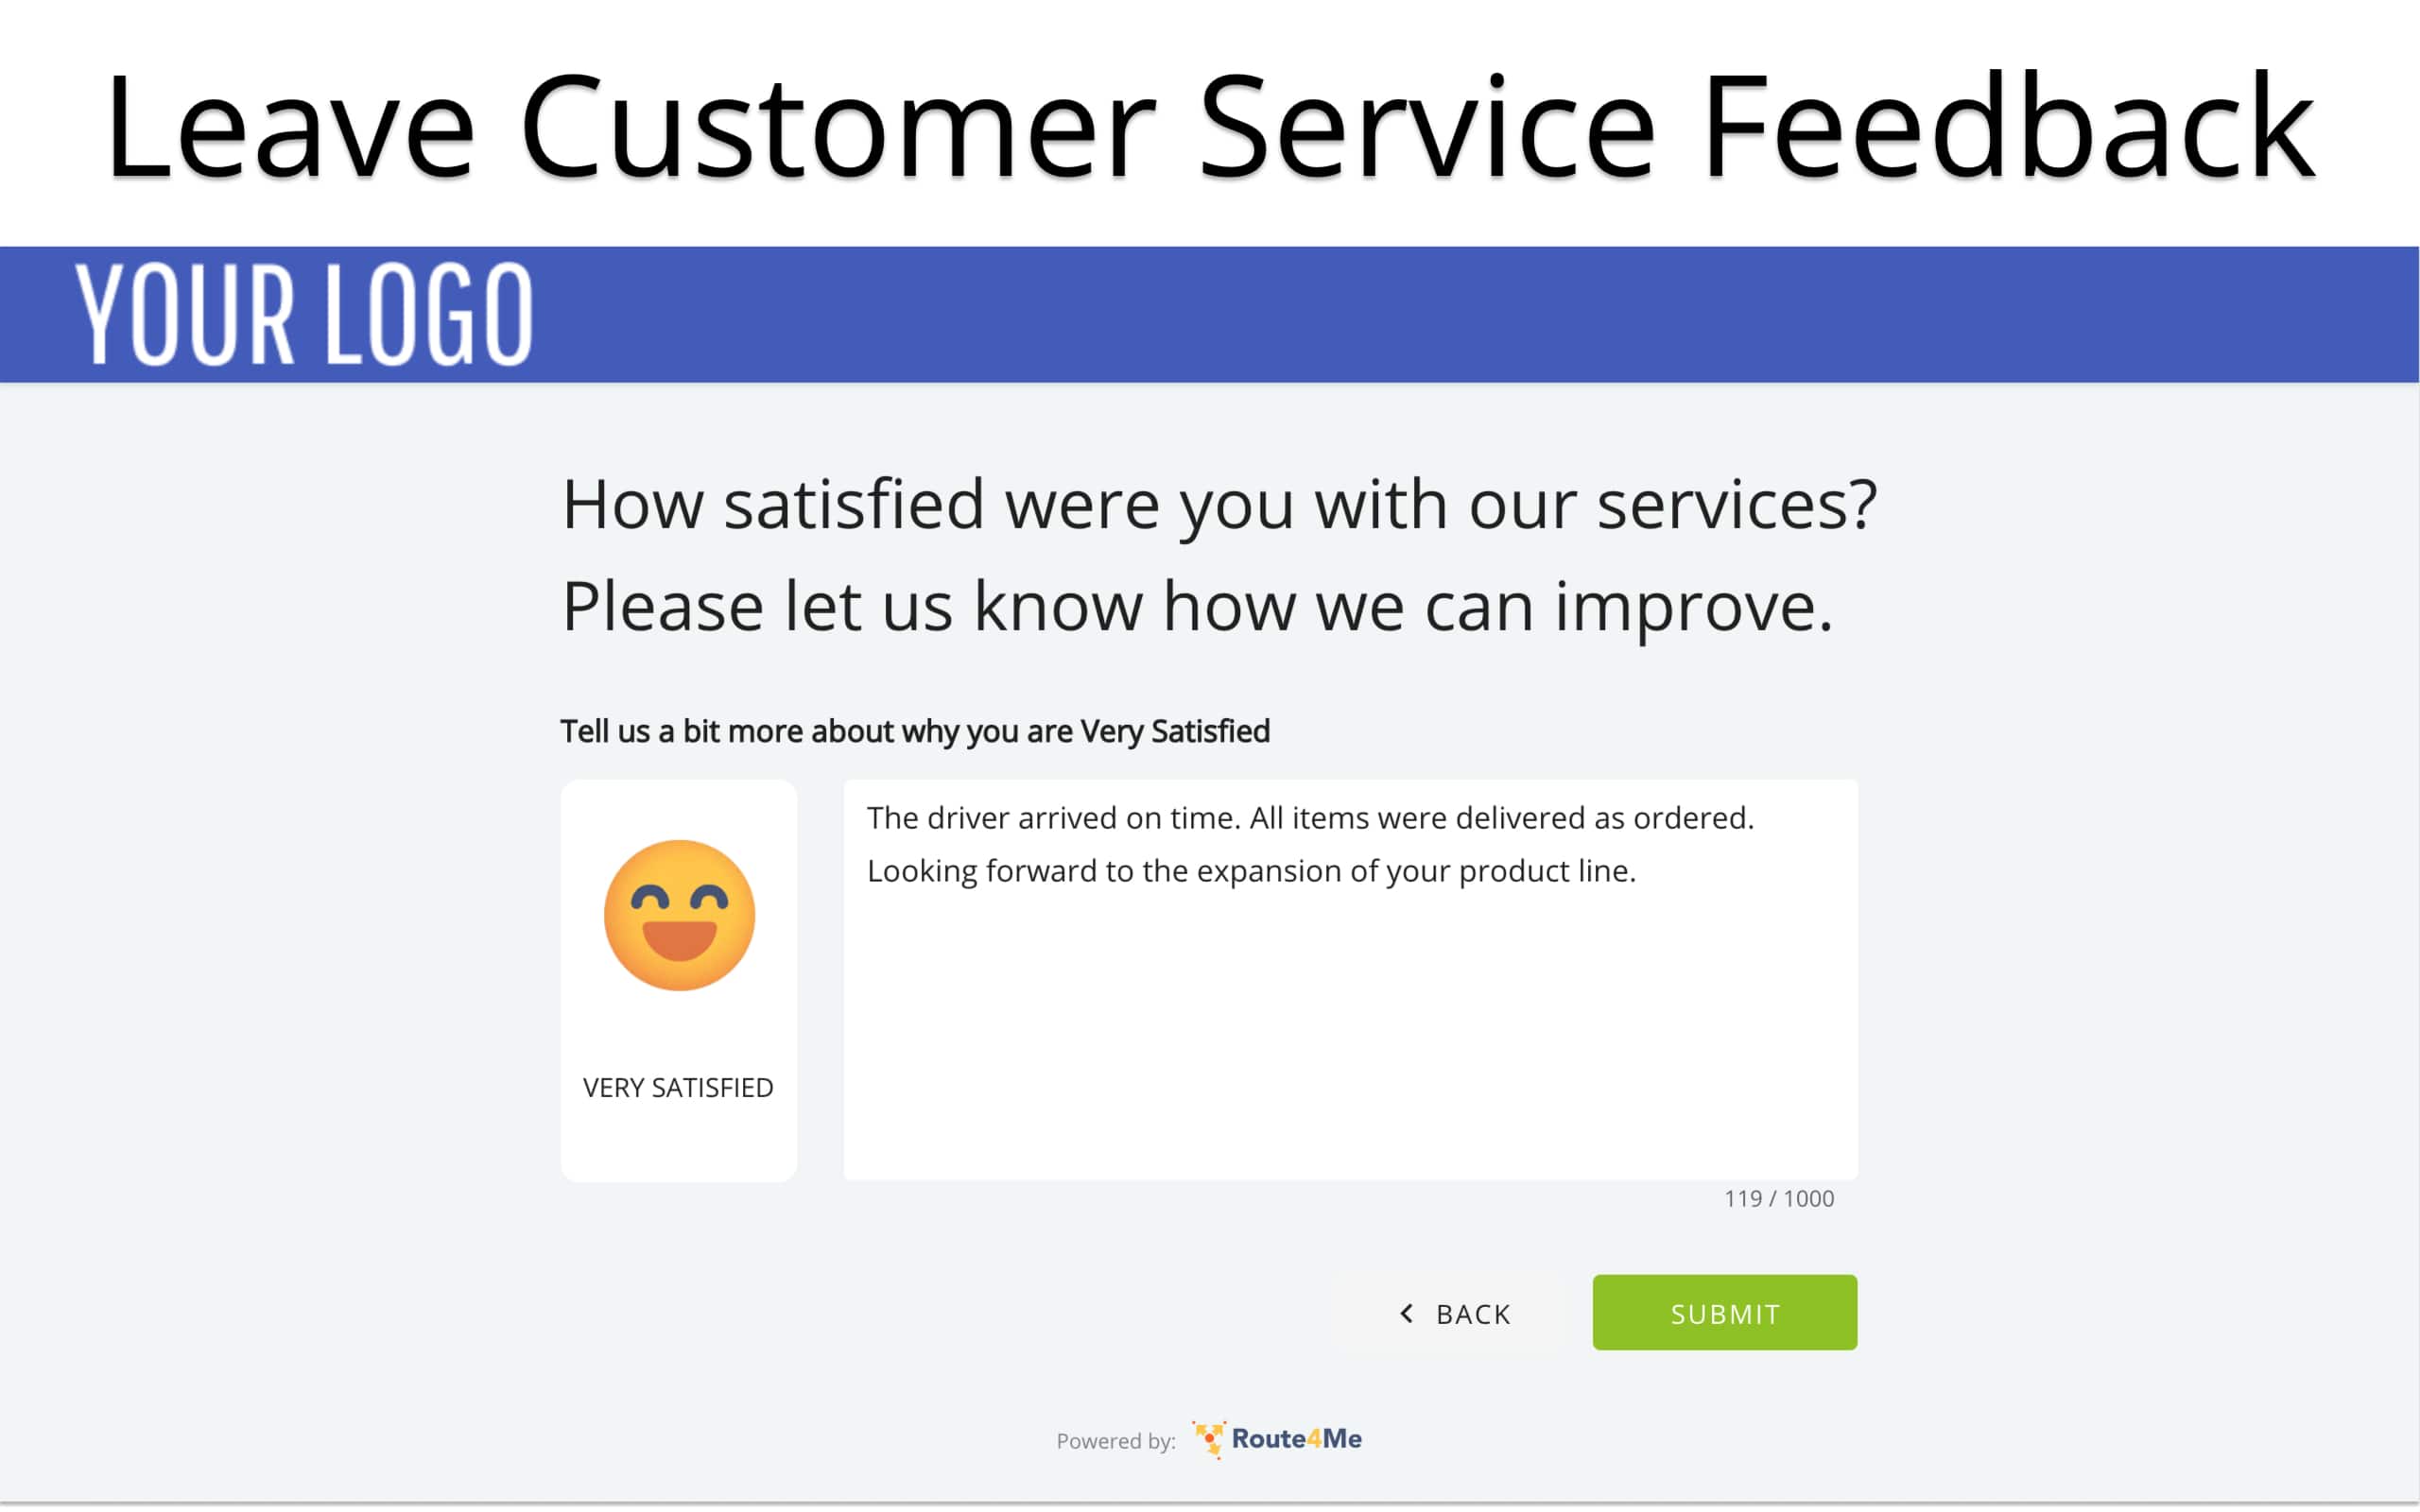 Leave your customer satisfaction feedback about the provided services in the text field.